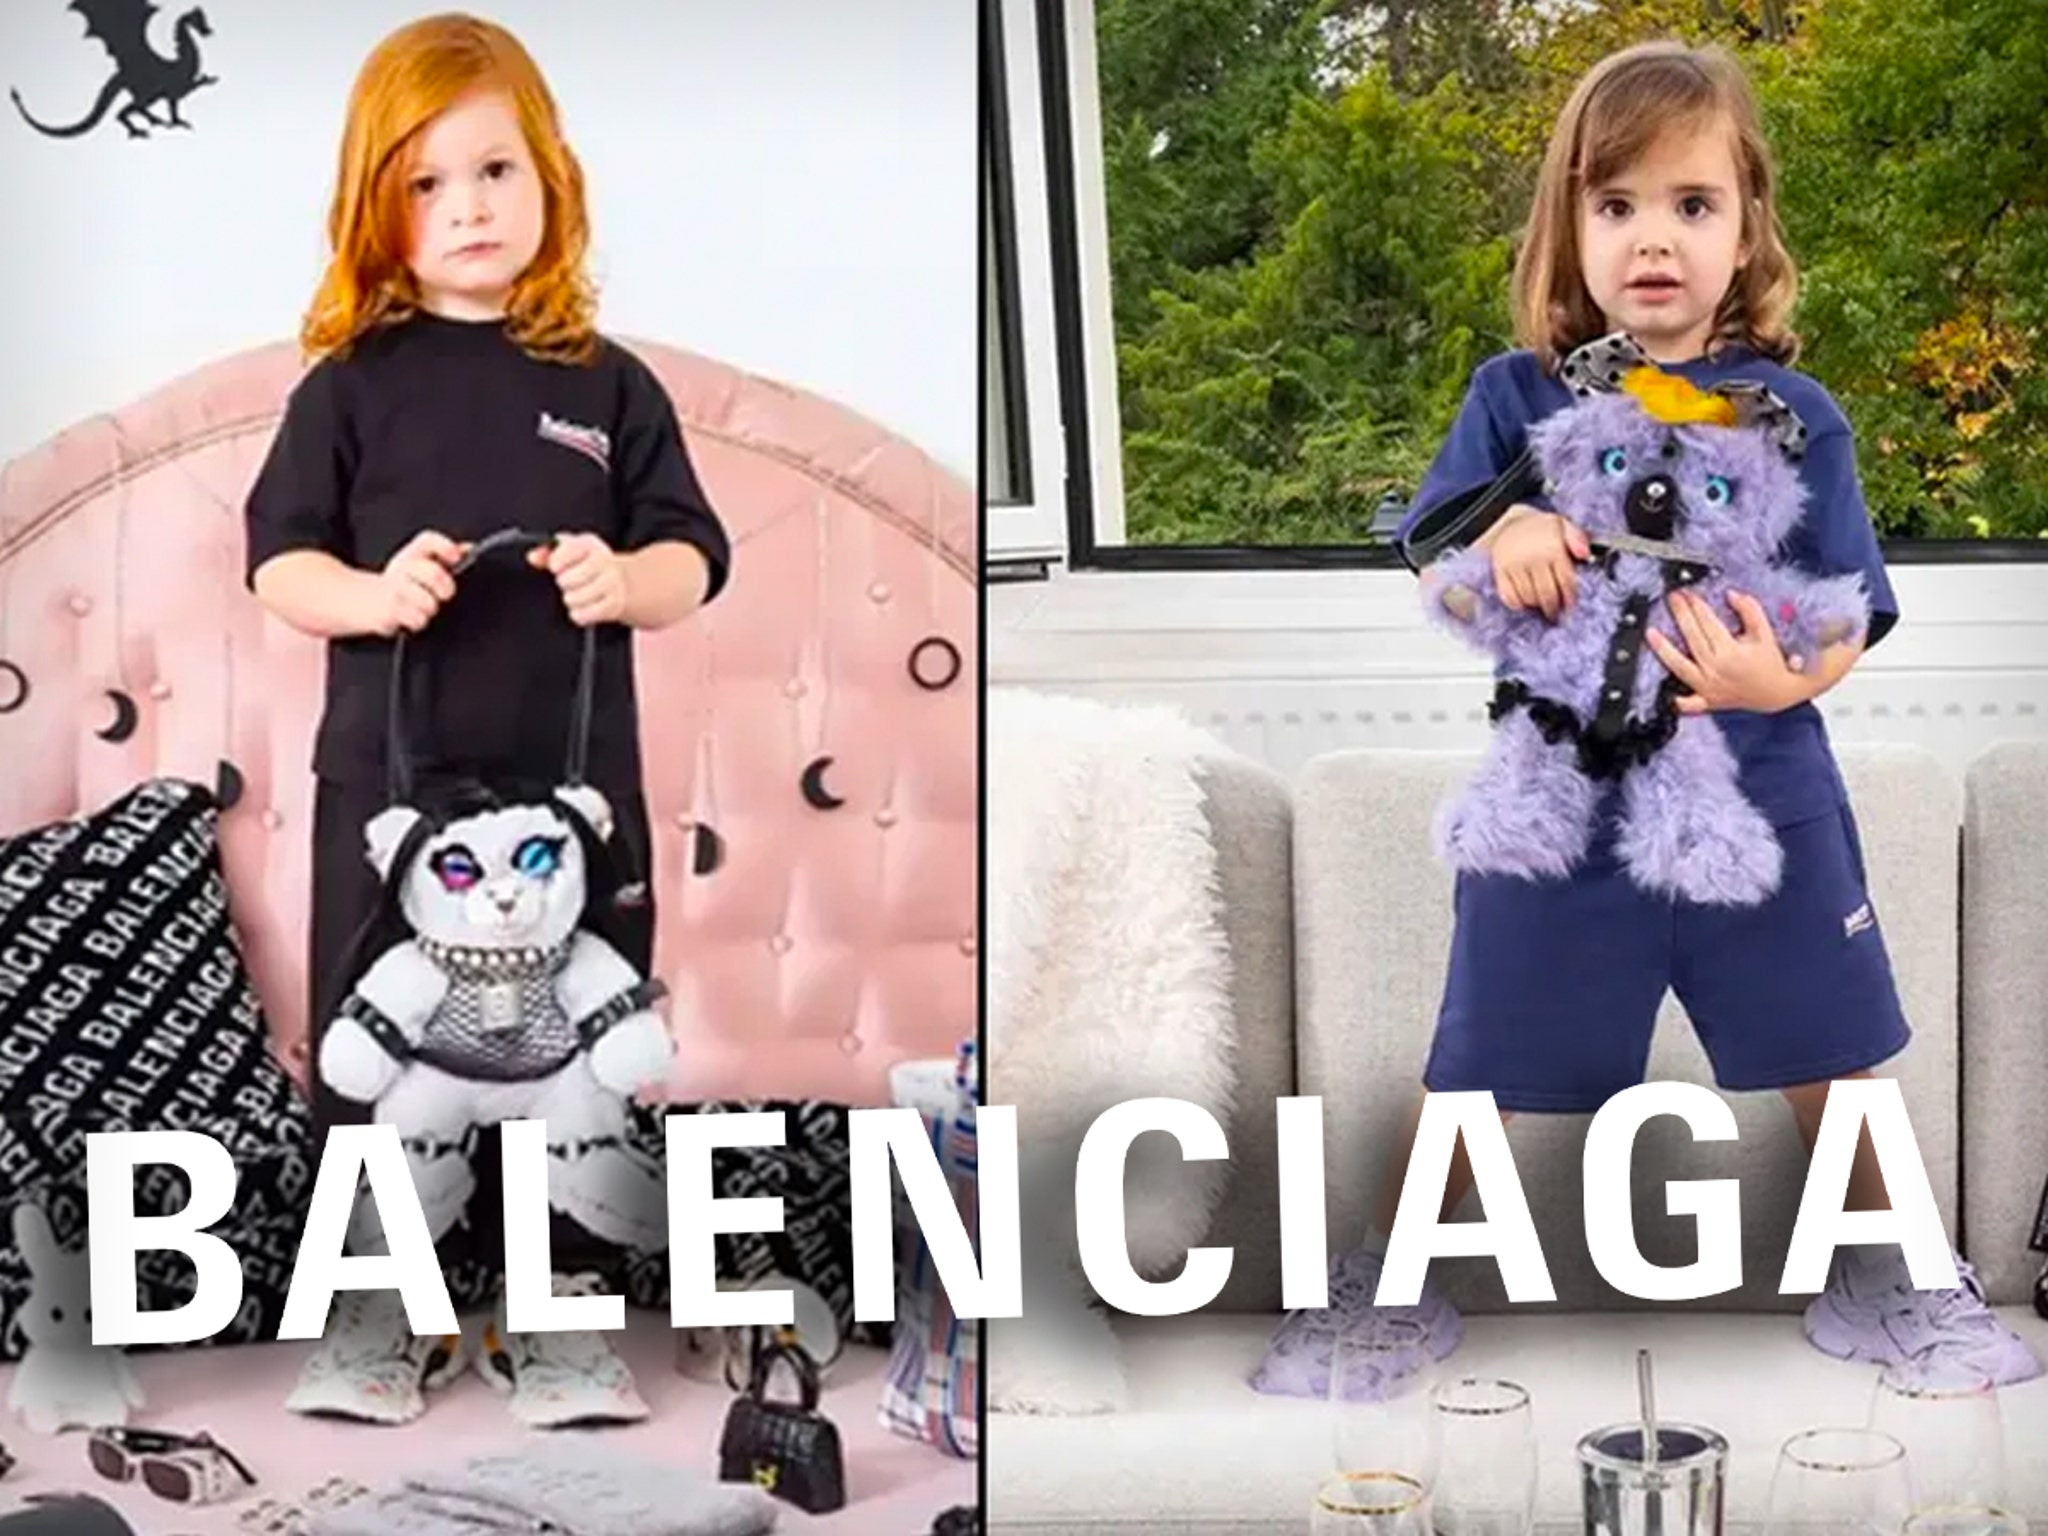 Balenciaga is suing the producers of its own ad campaign after facing  backlash